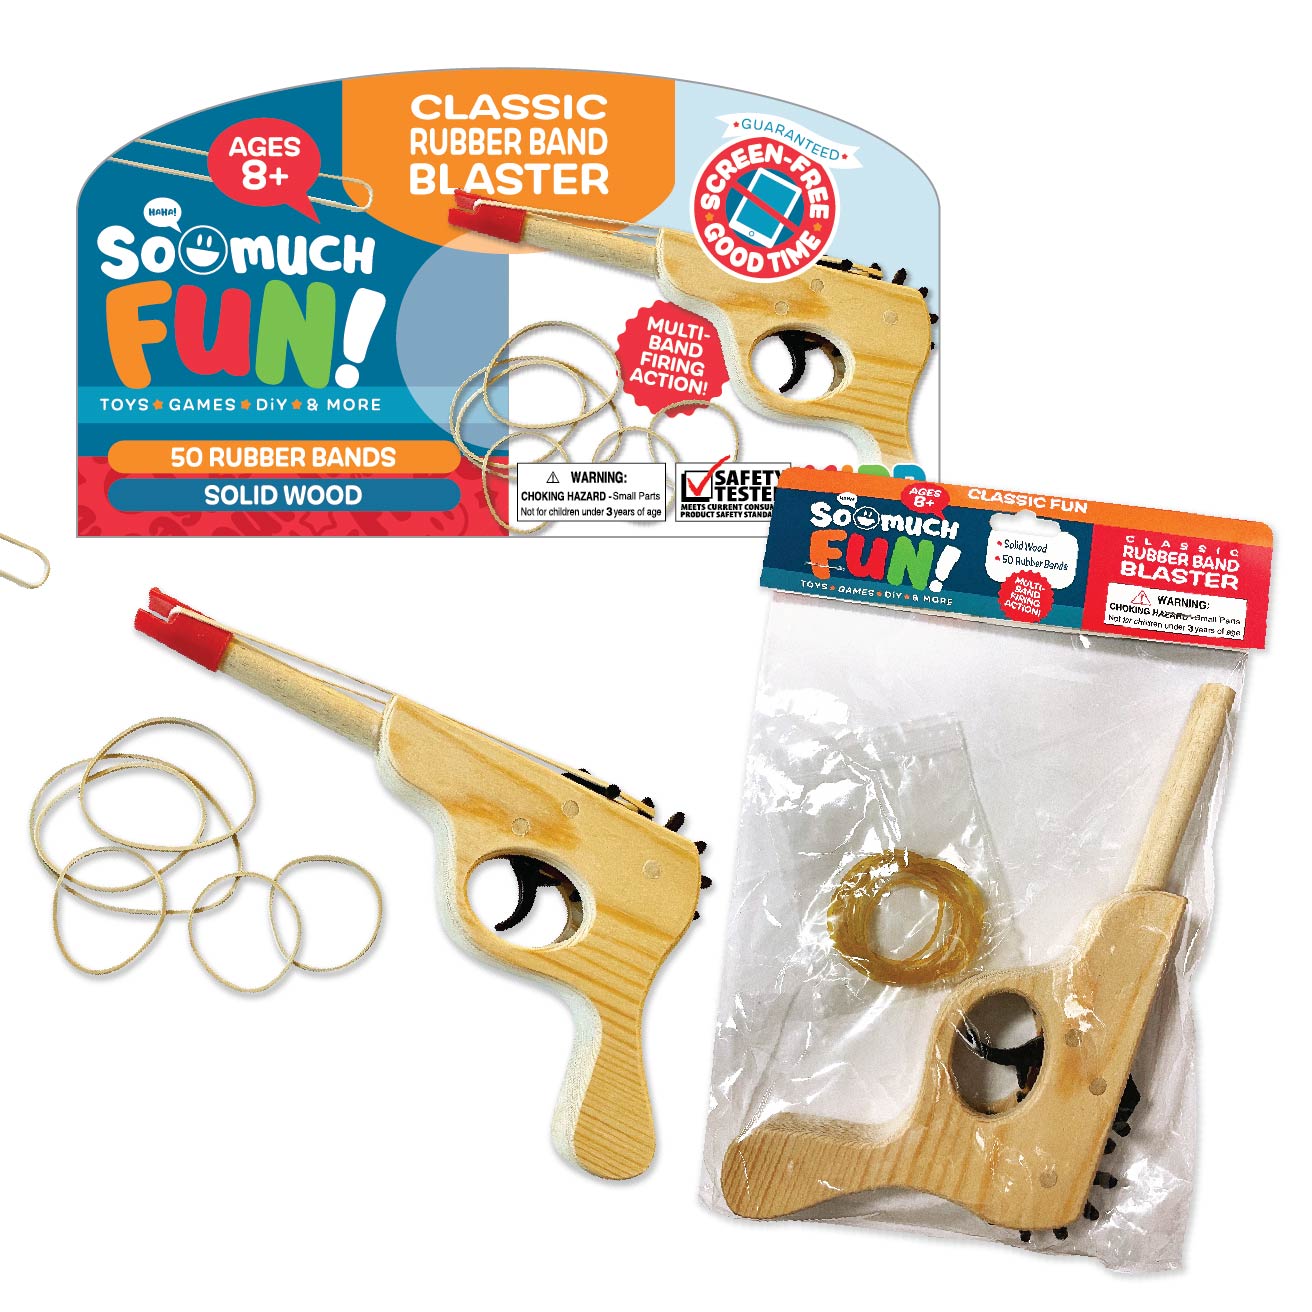 ITEM NUMBER 022939 RUBBER BAND BLASTER 12 PIECES PER PACK